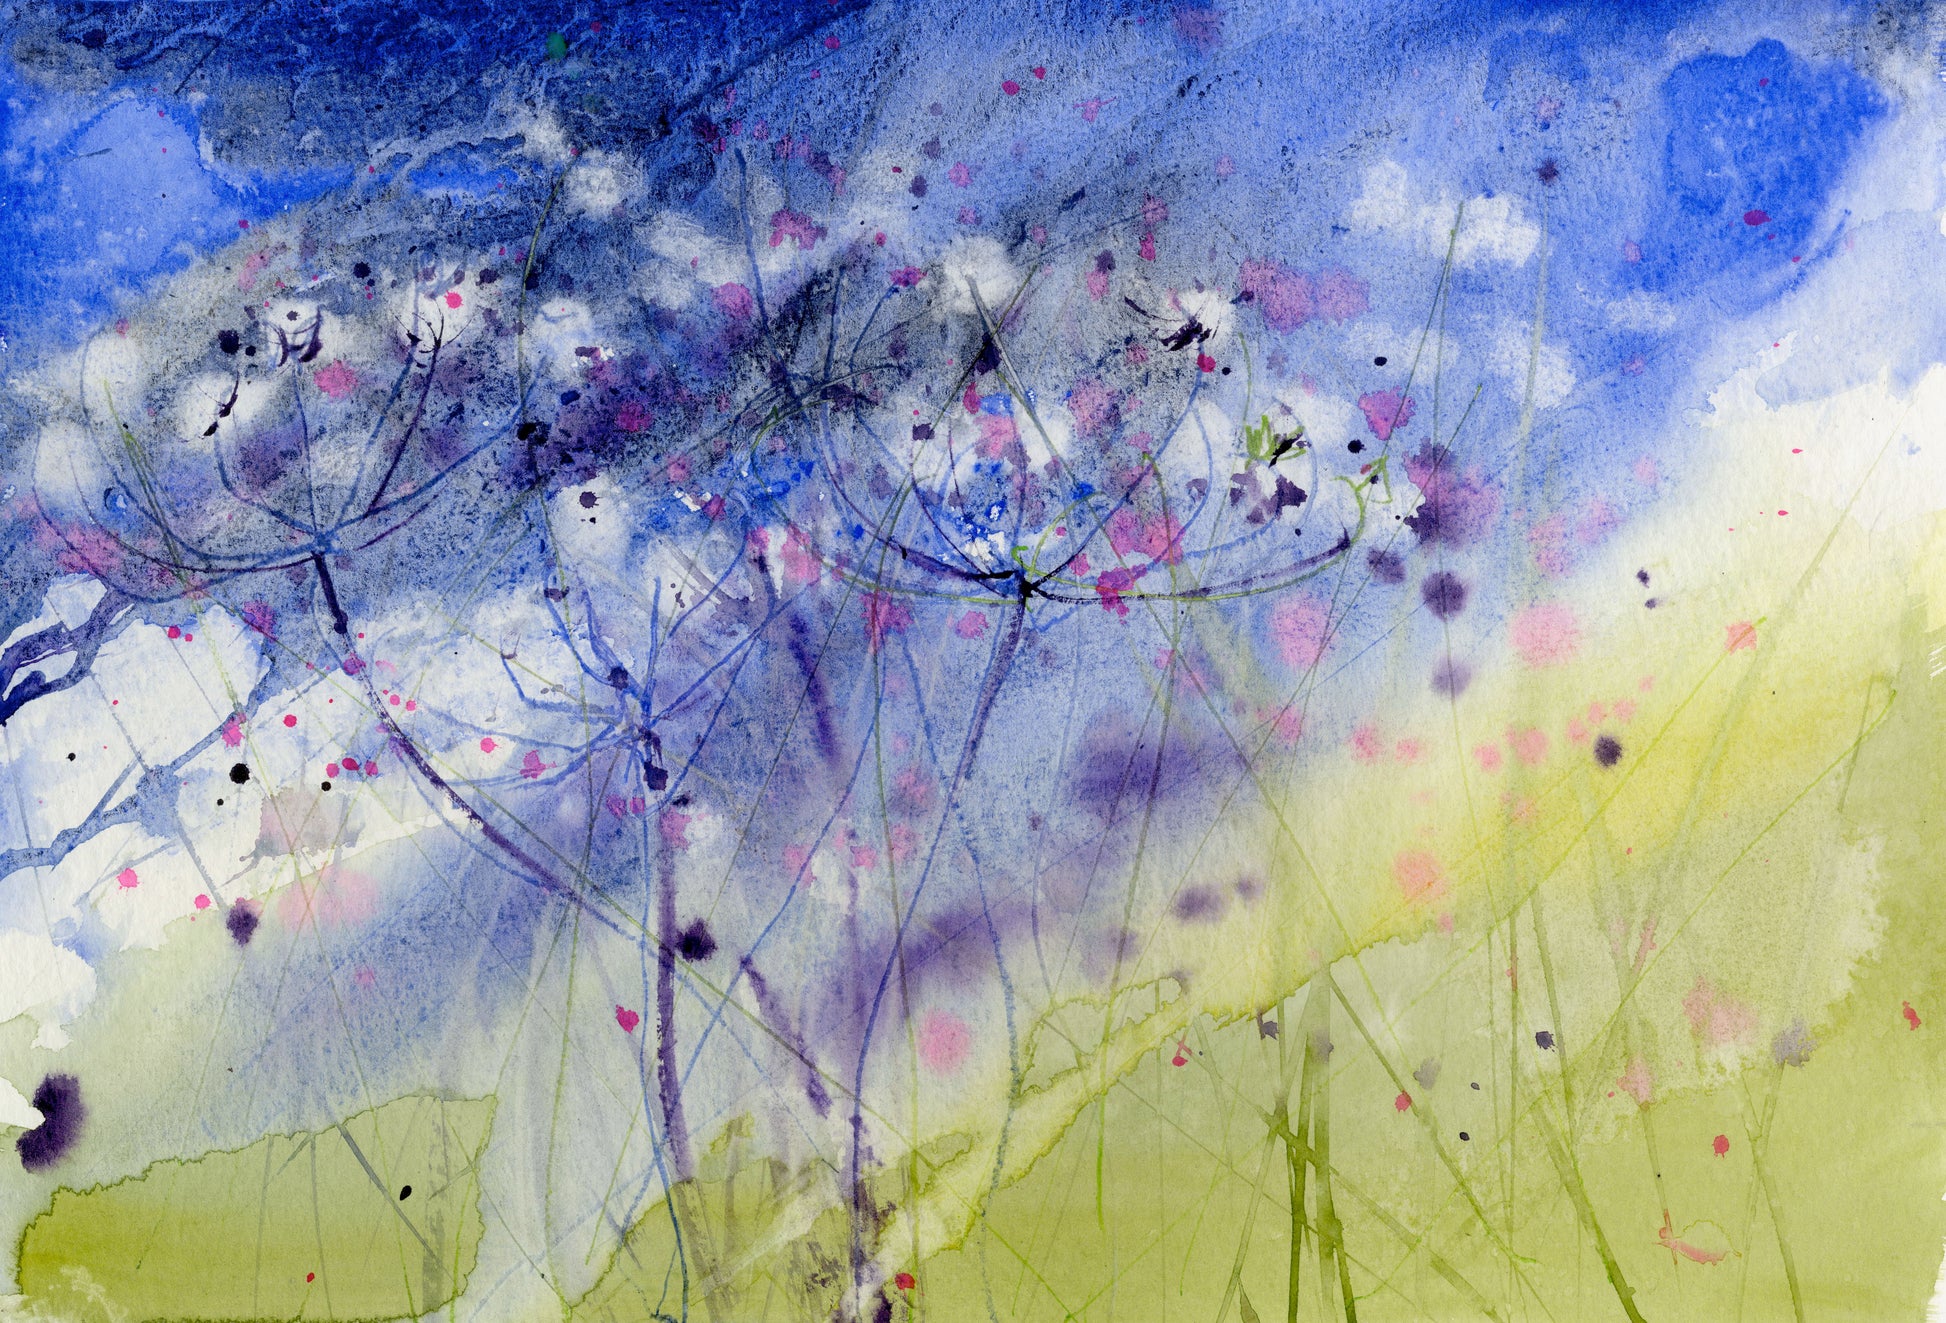 Limited edition print "Cow parsley" - Jen Buckley Art limited edition animal art prints